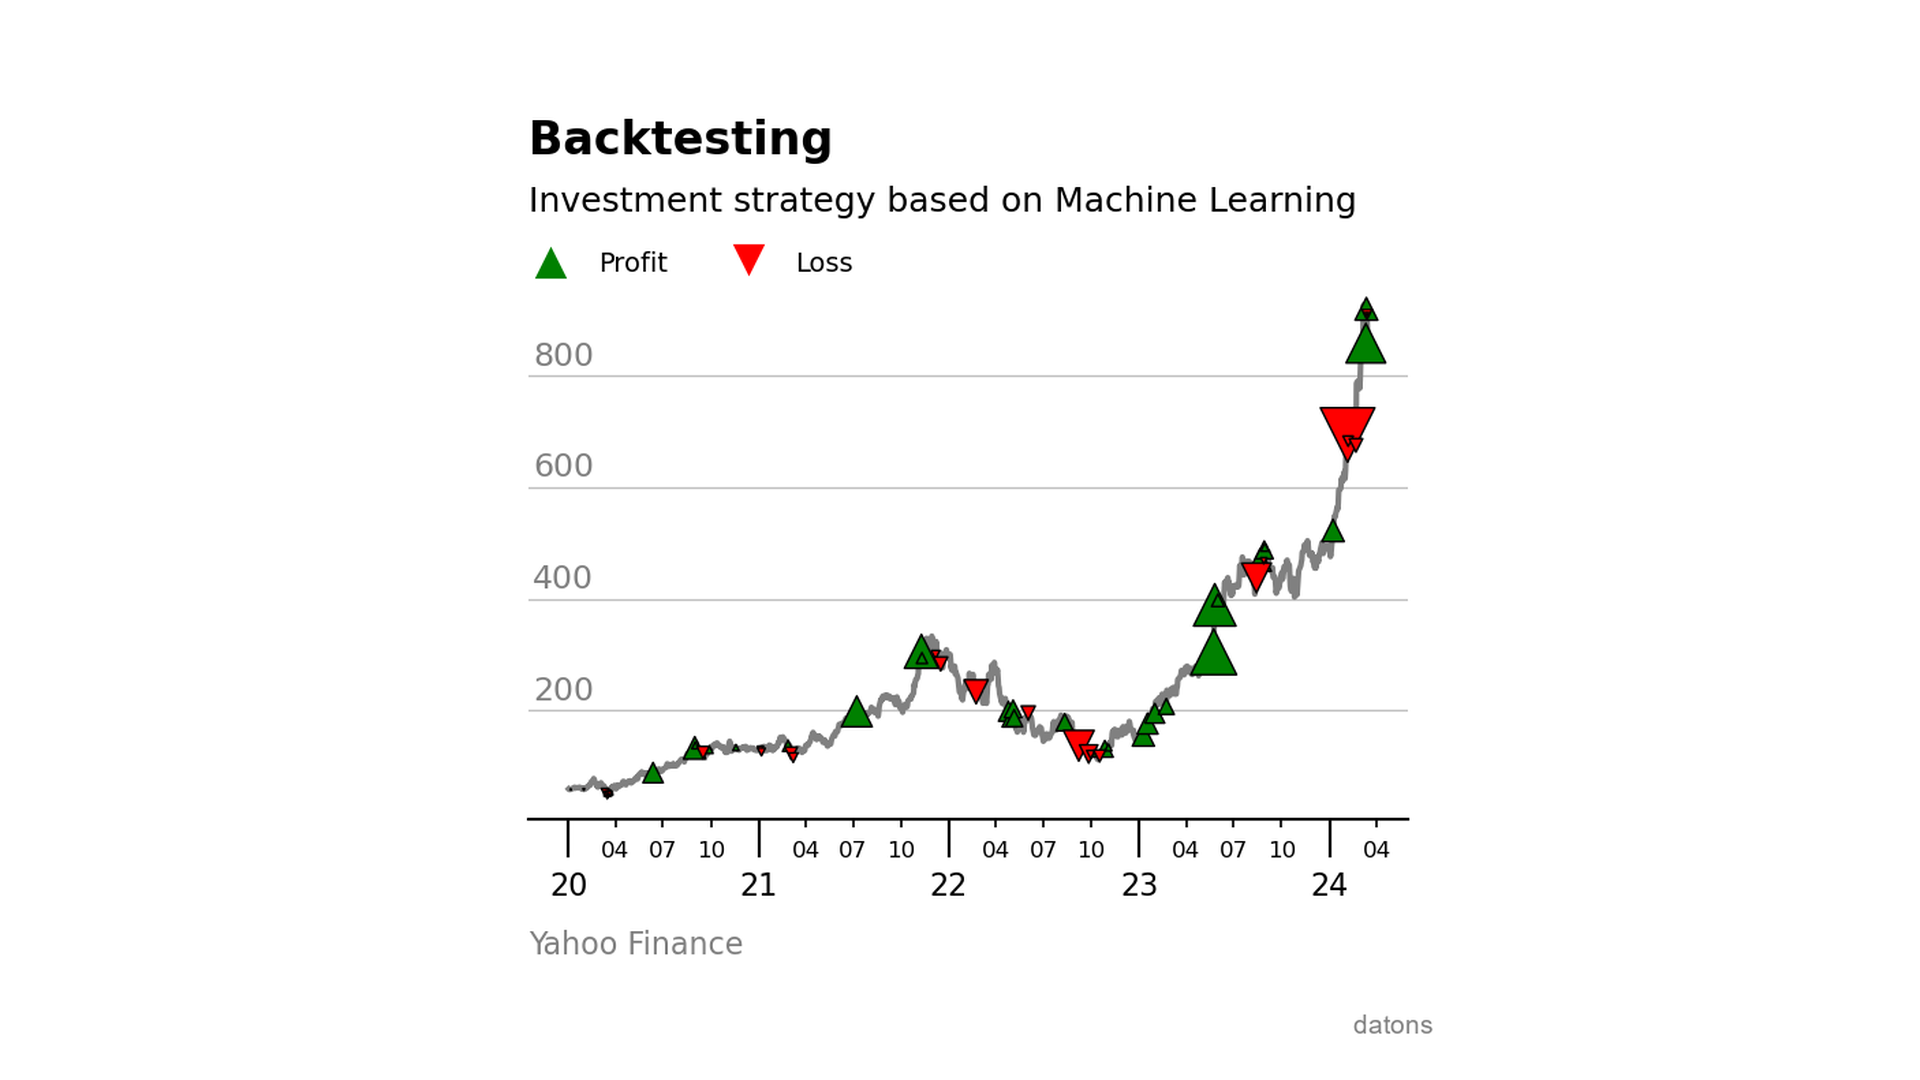 Backtesting with ML-based investment strategies